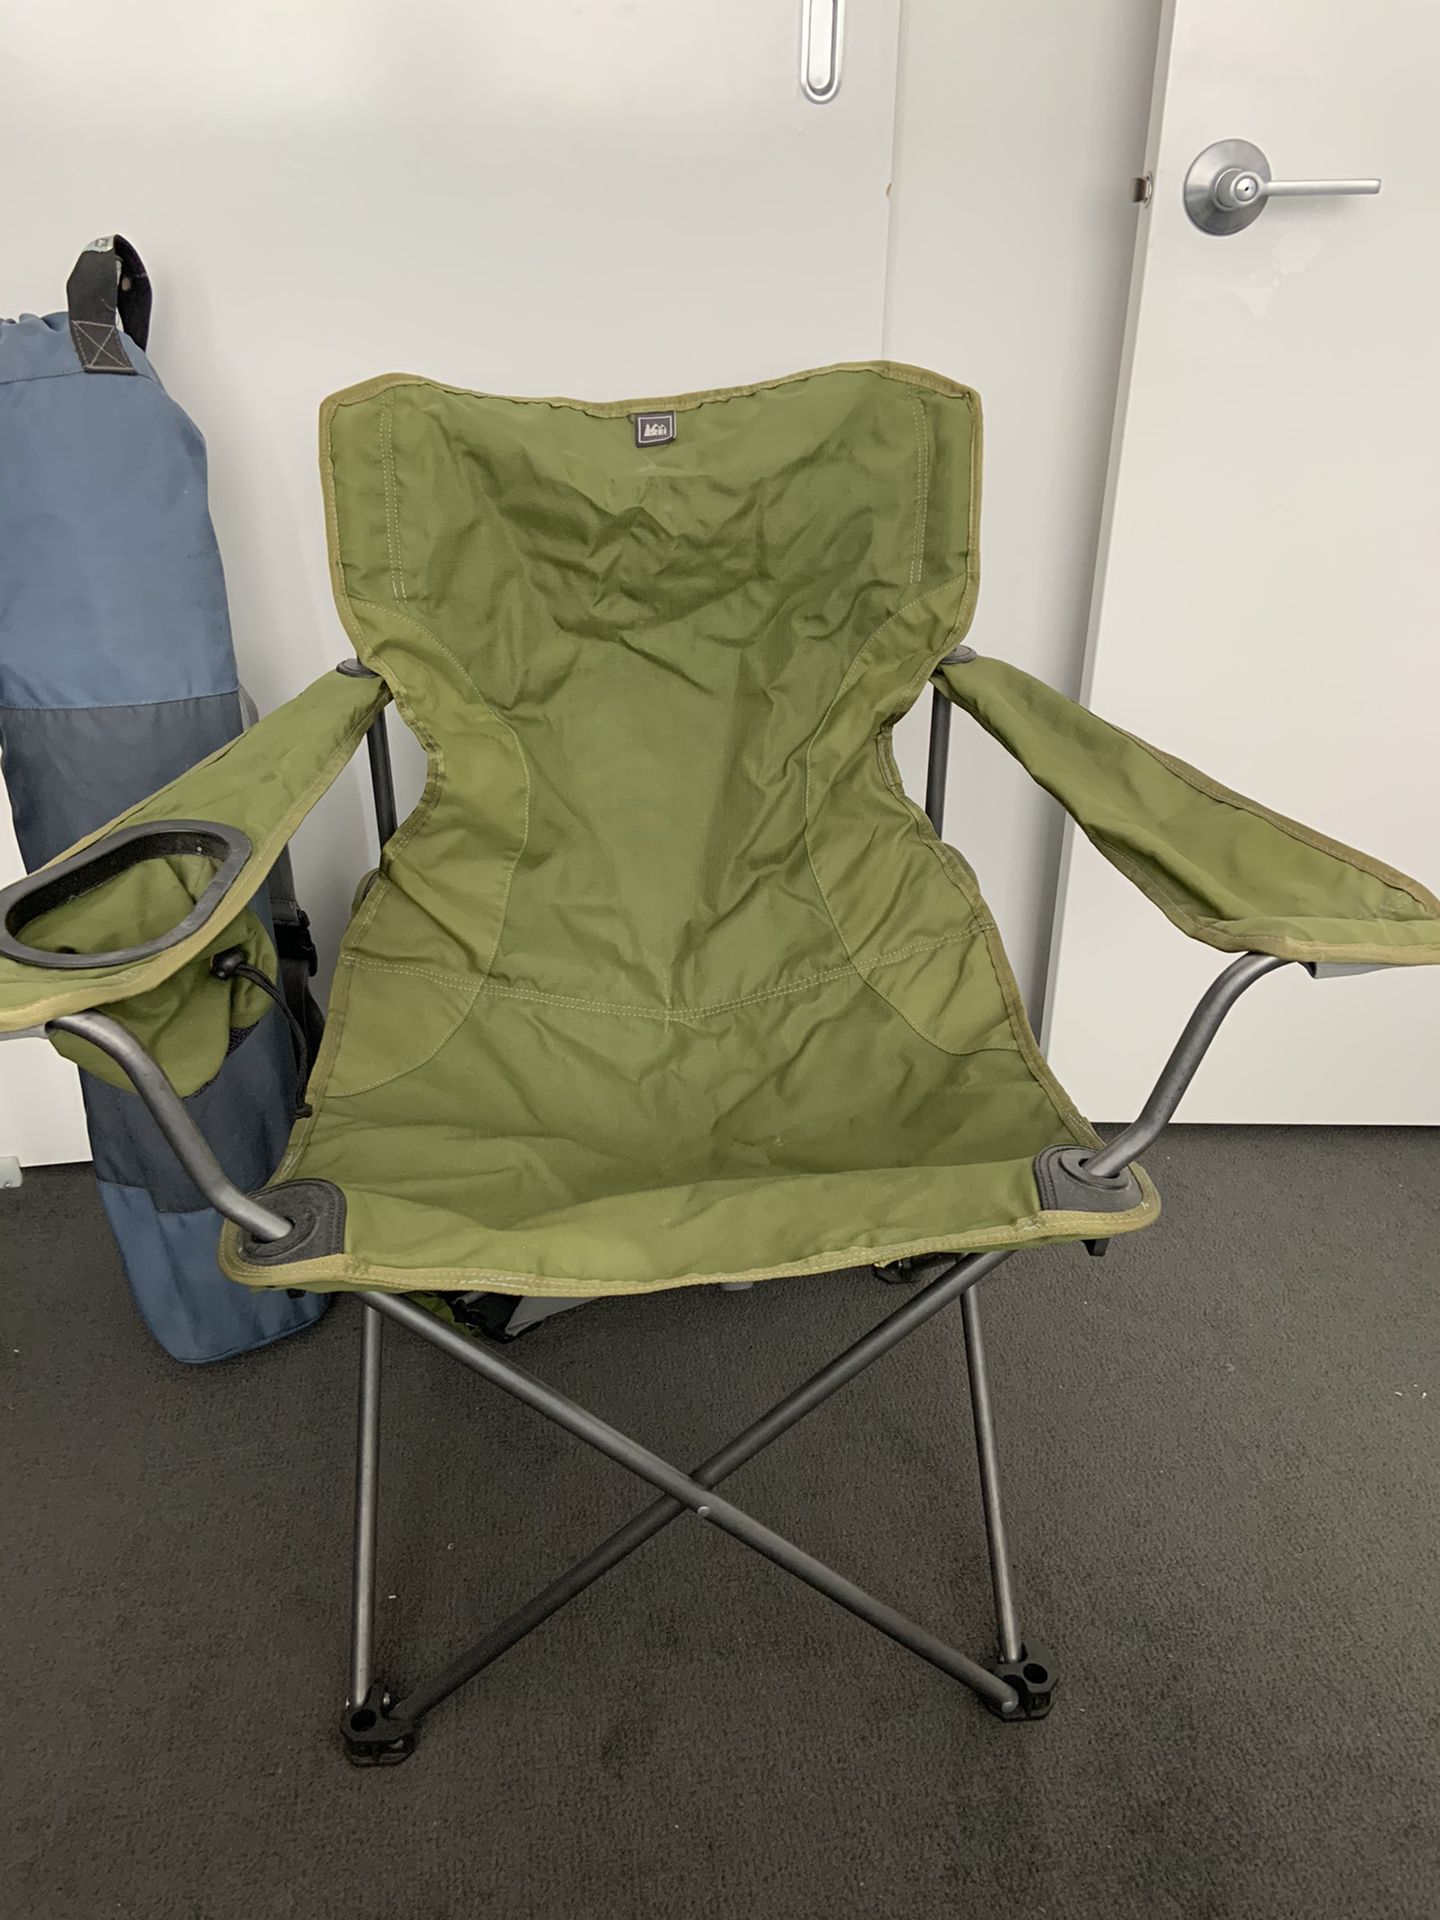 REI camp chair with carrying bag x 2